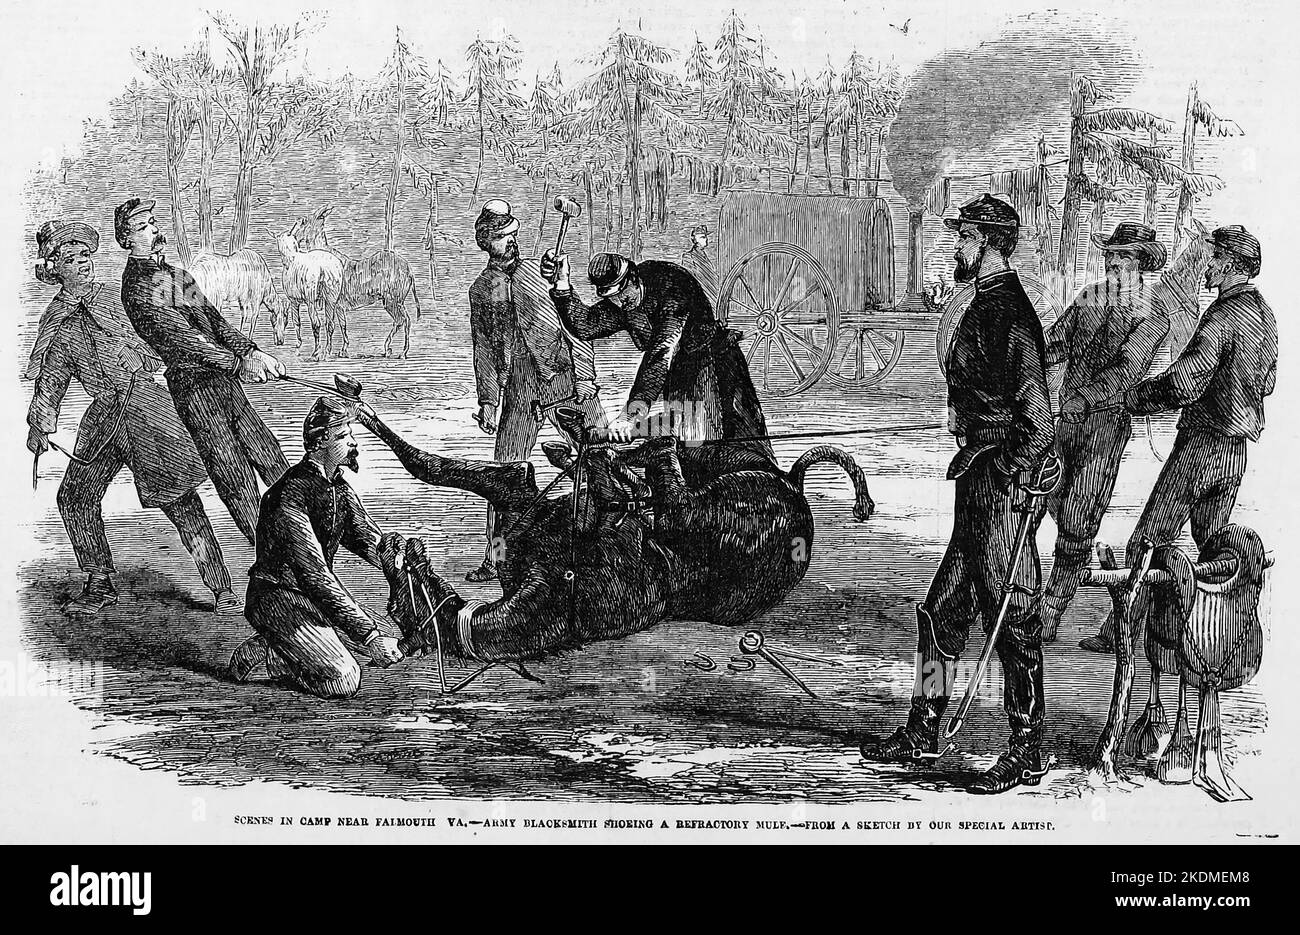 Scenes in camp near Falmouth, Virginia - Army blacksmith shoeing a refractory mule. March 1863. 19th century American Civil War illustration from Frank Leslie's Illustrated Newspaper Stock Photo